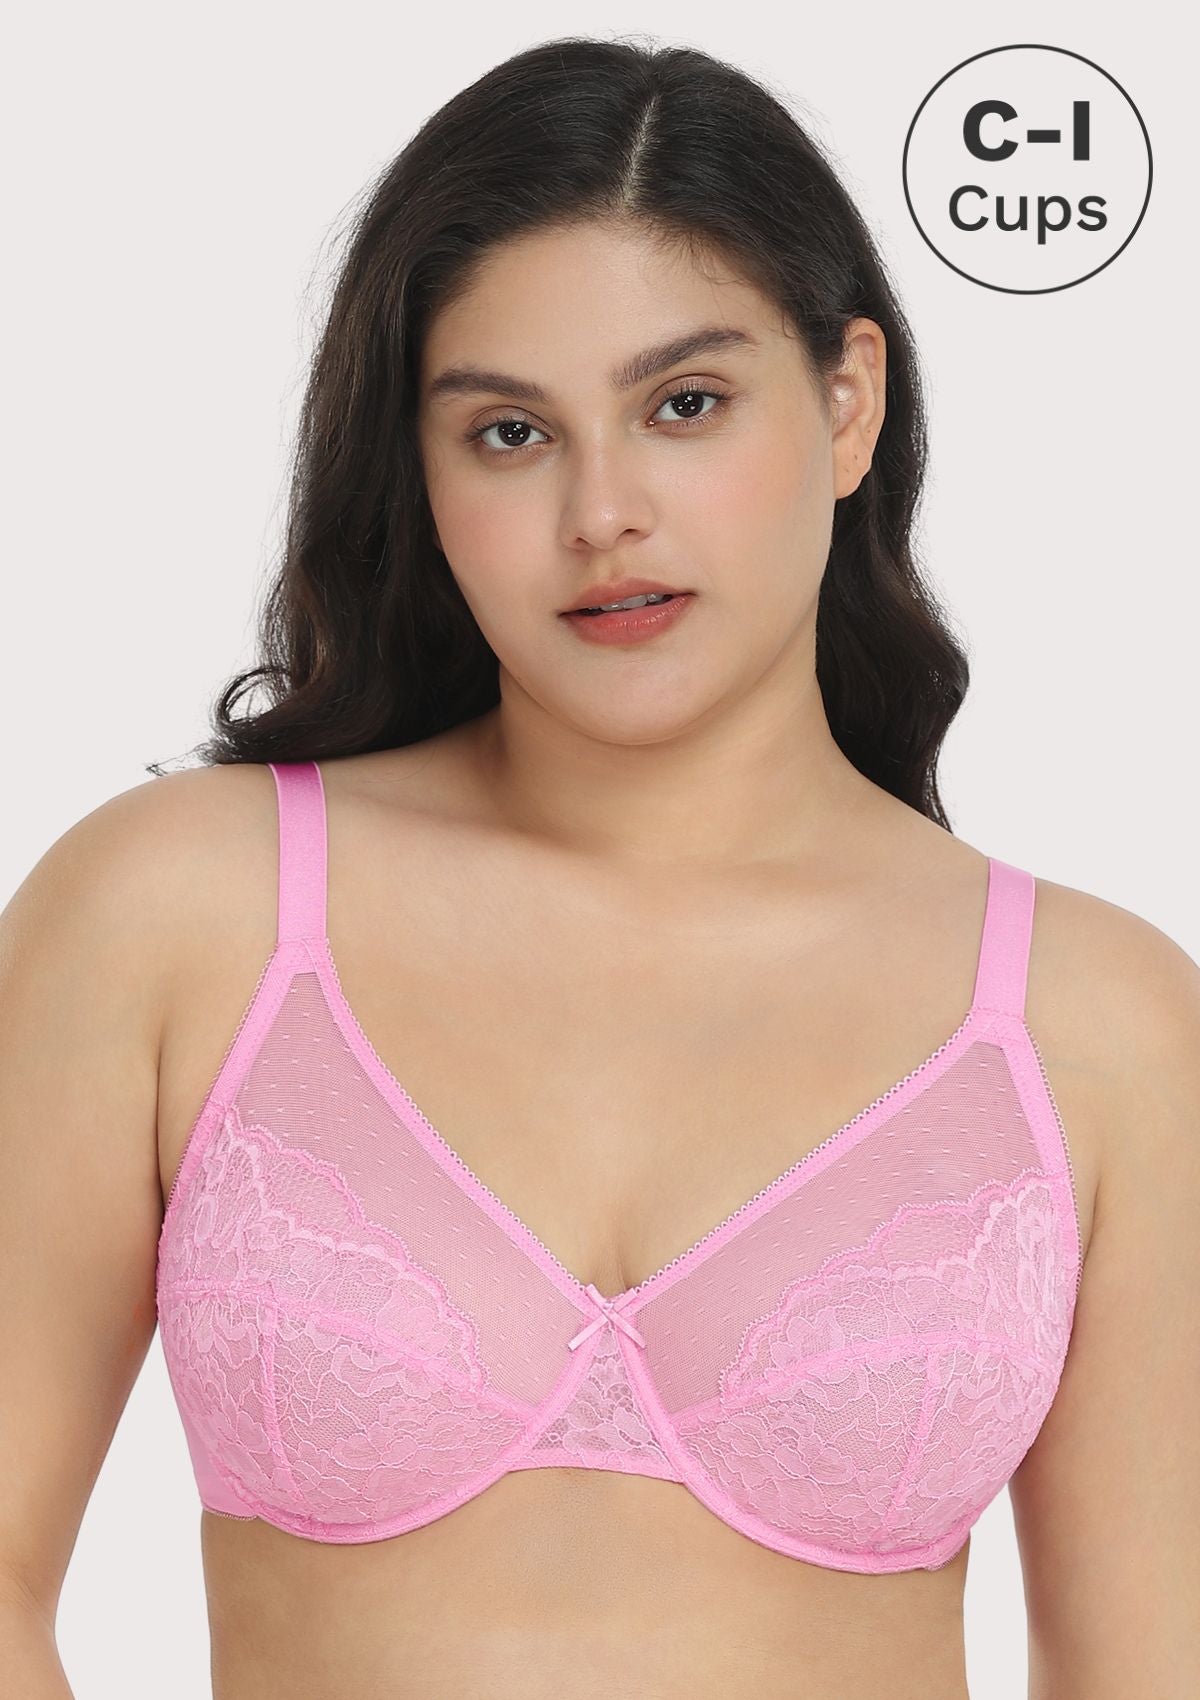 HSIA Enchante Lacy Bra: Comfy Sheer Lace Bra With Lift - Dusty Peach / 44 / D